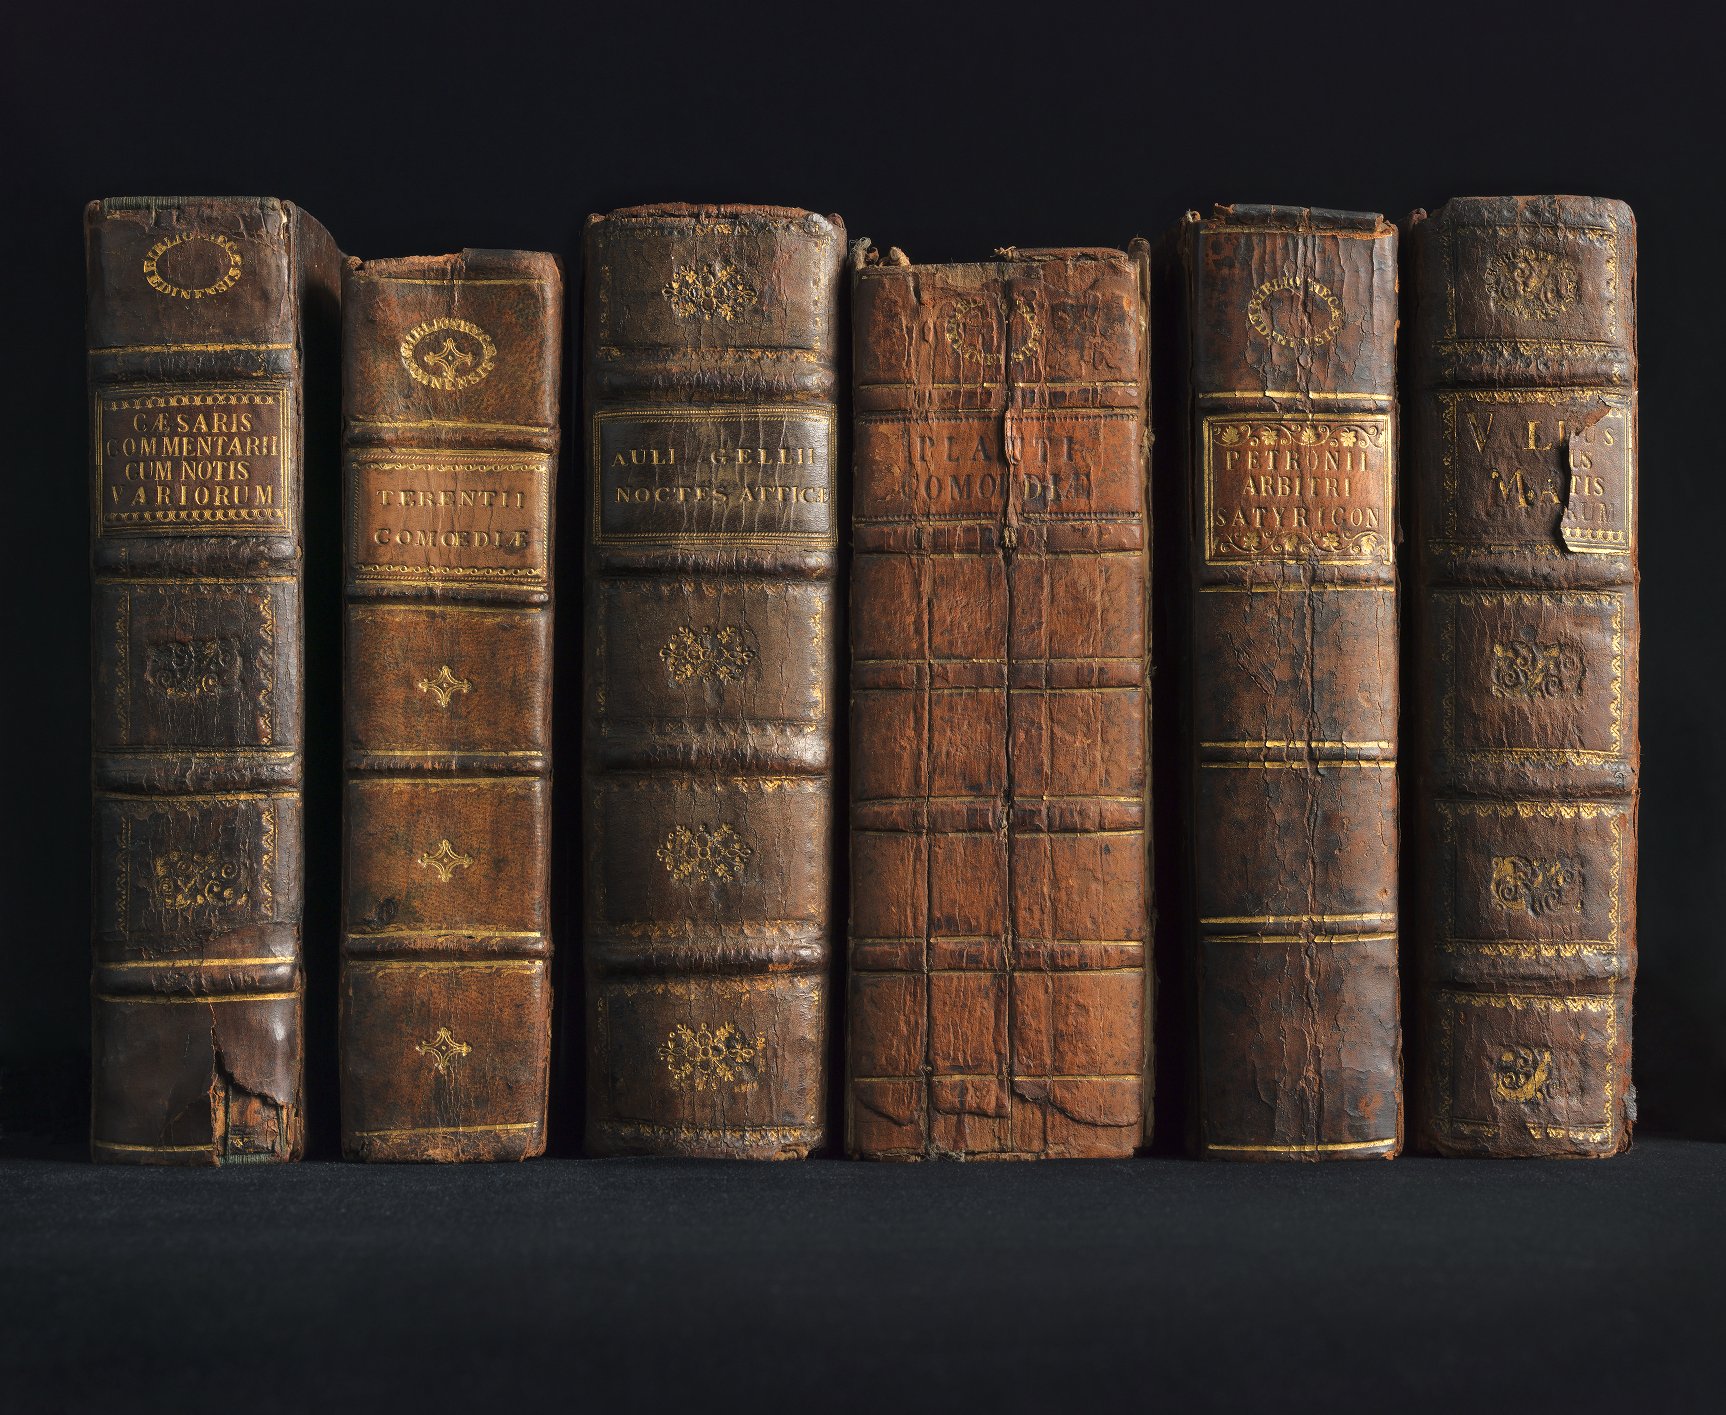 Row of books, bound in old, cracked brown leather resting on a black background with spines facing outwards.